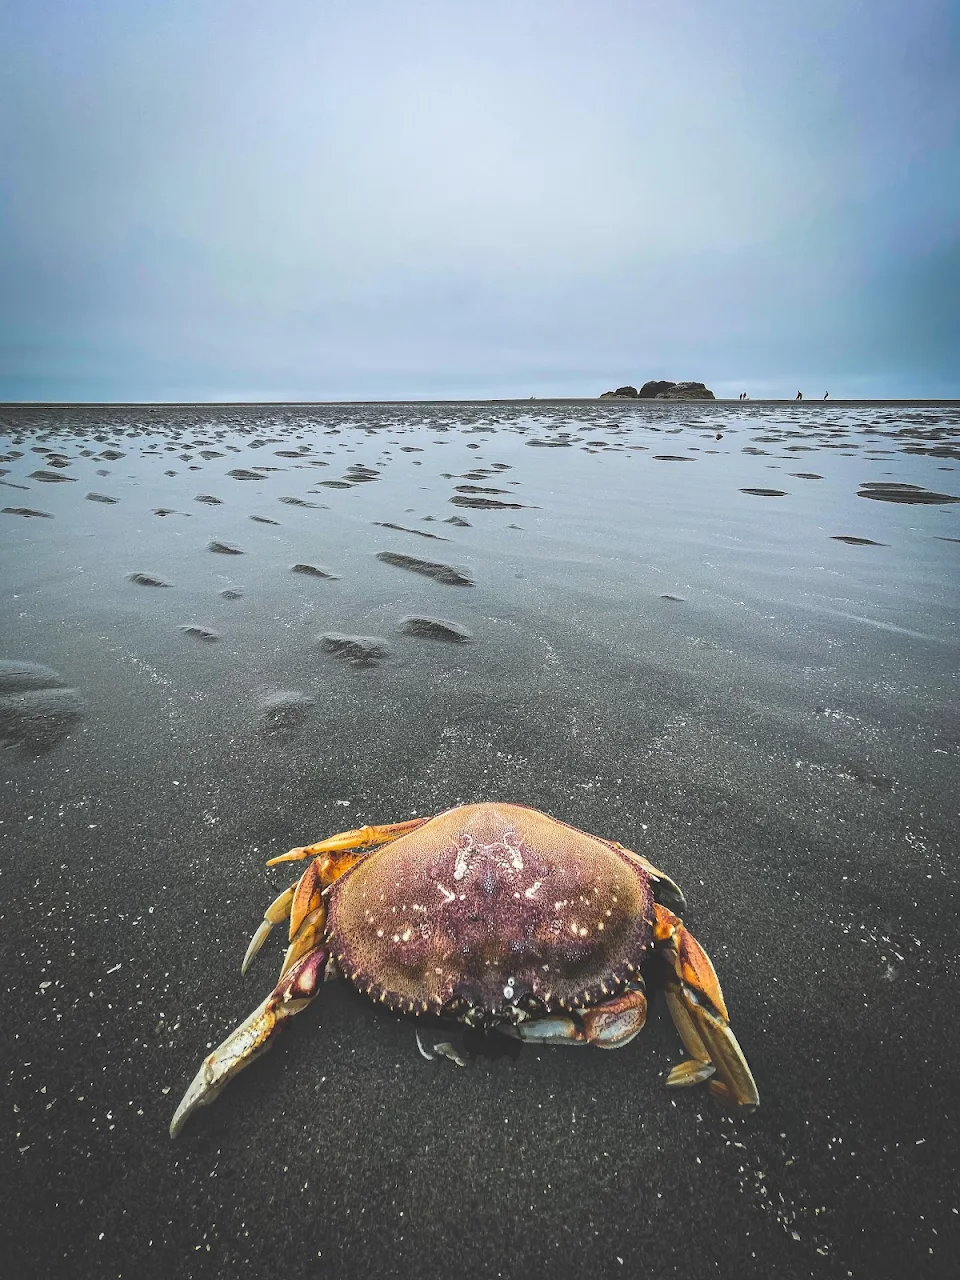 I found a dead crab on the beach and took a photo that I’m pretty happy with.